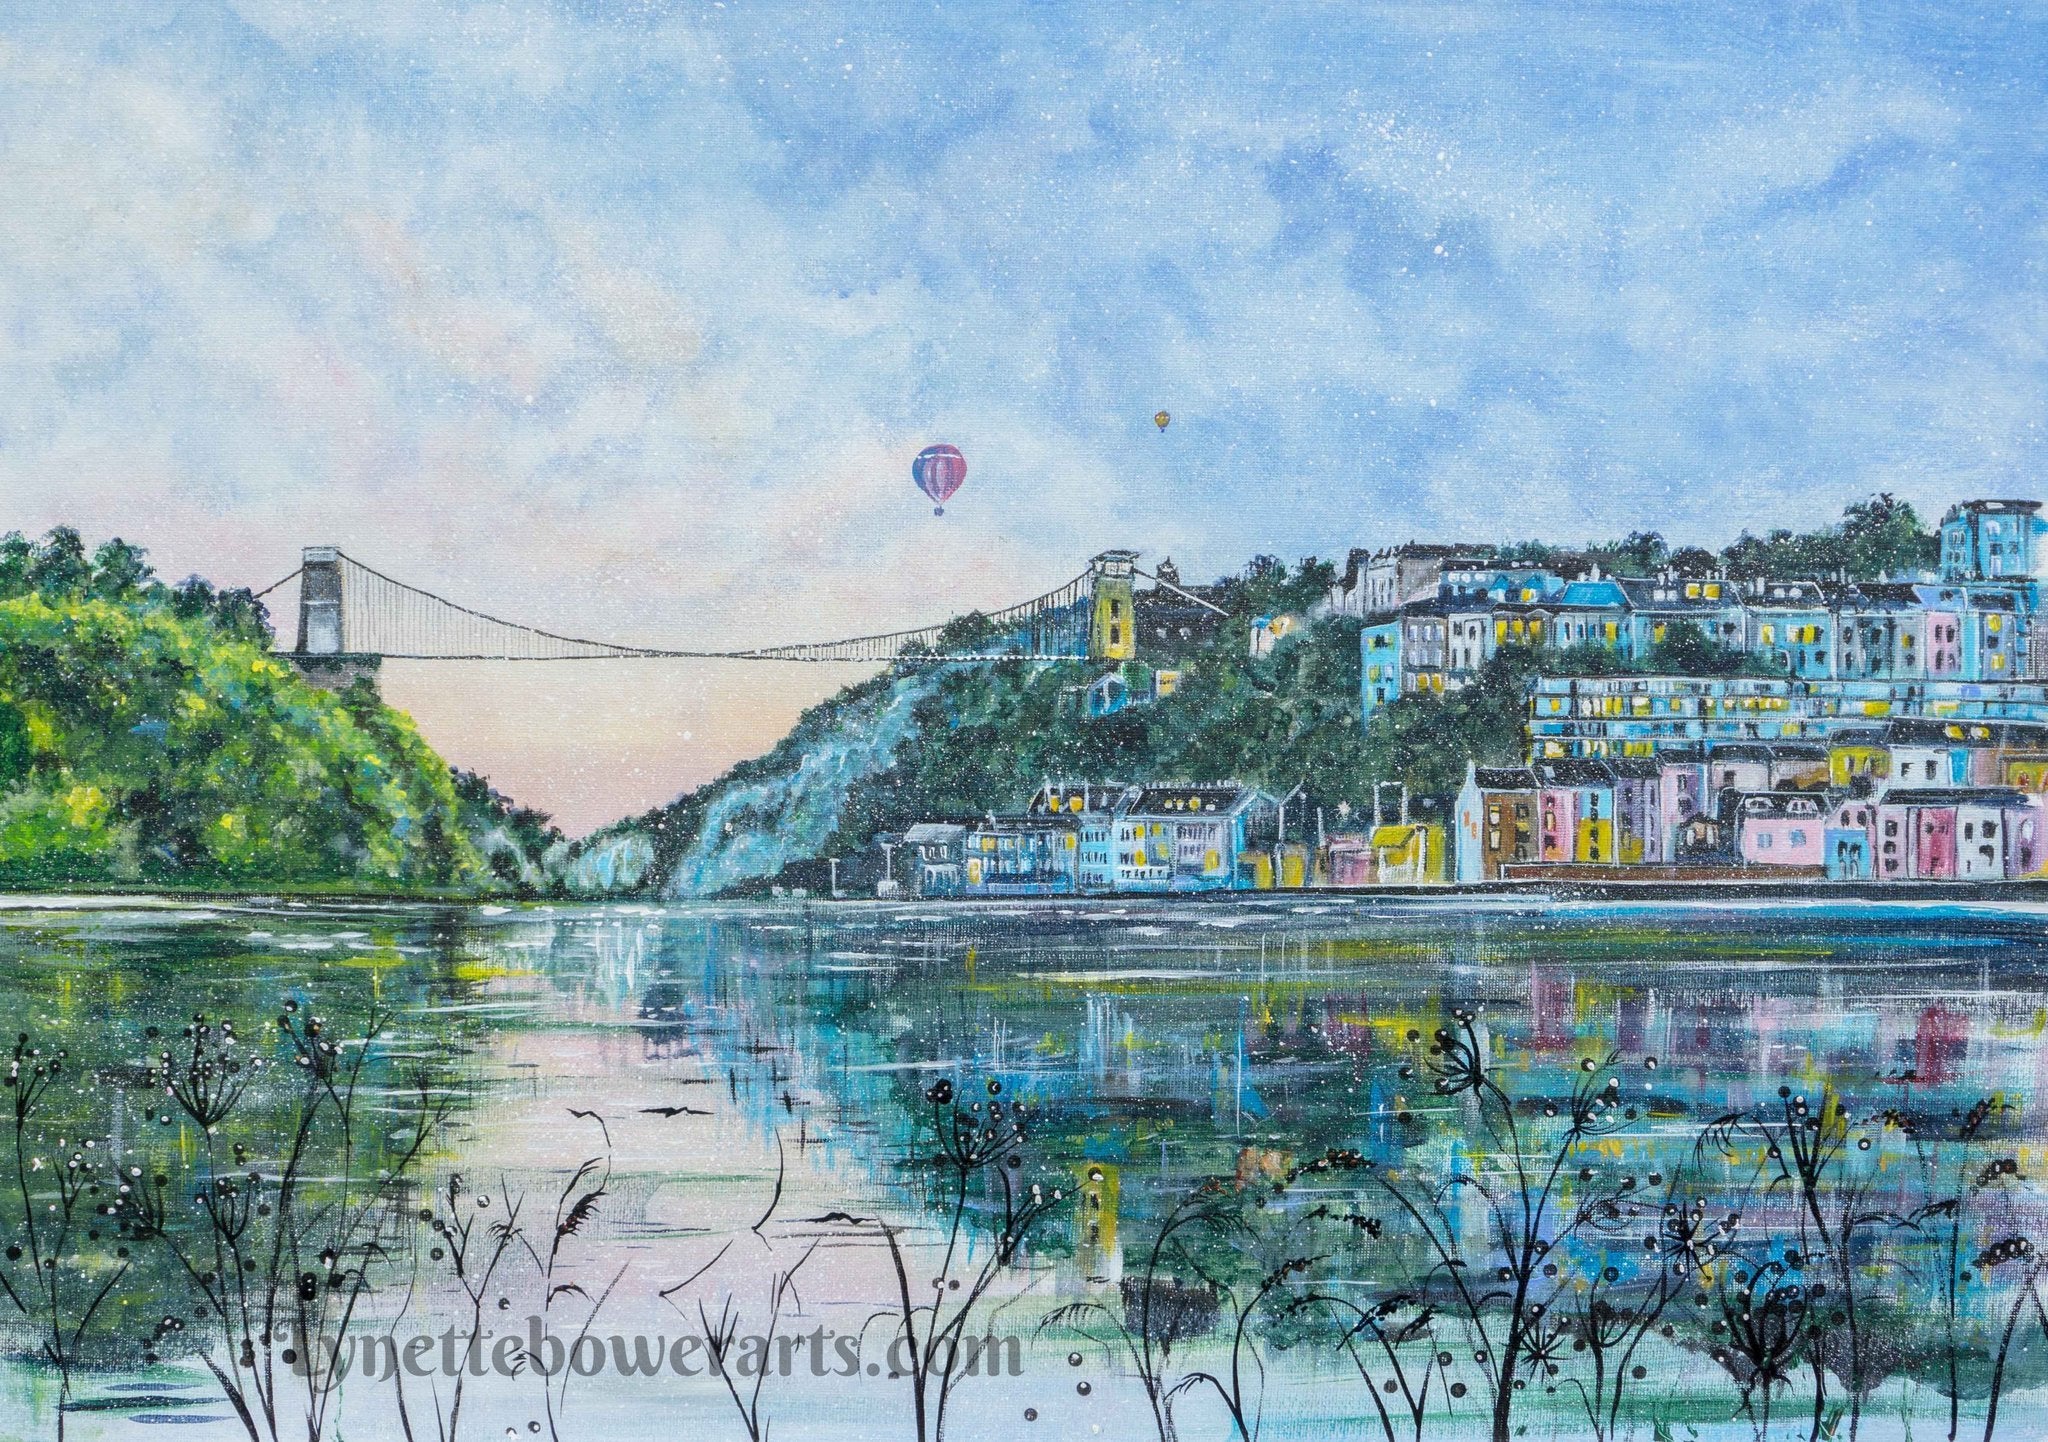 Clifton Suspension Bridge paintings at Eclectic Gift Shop